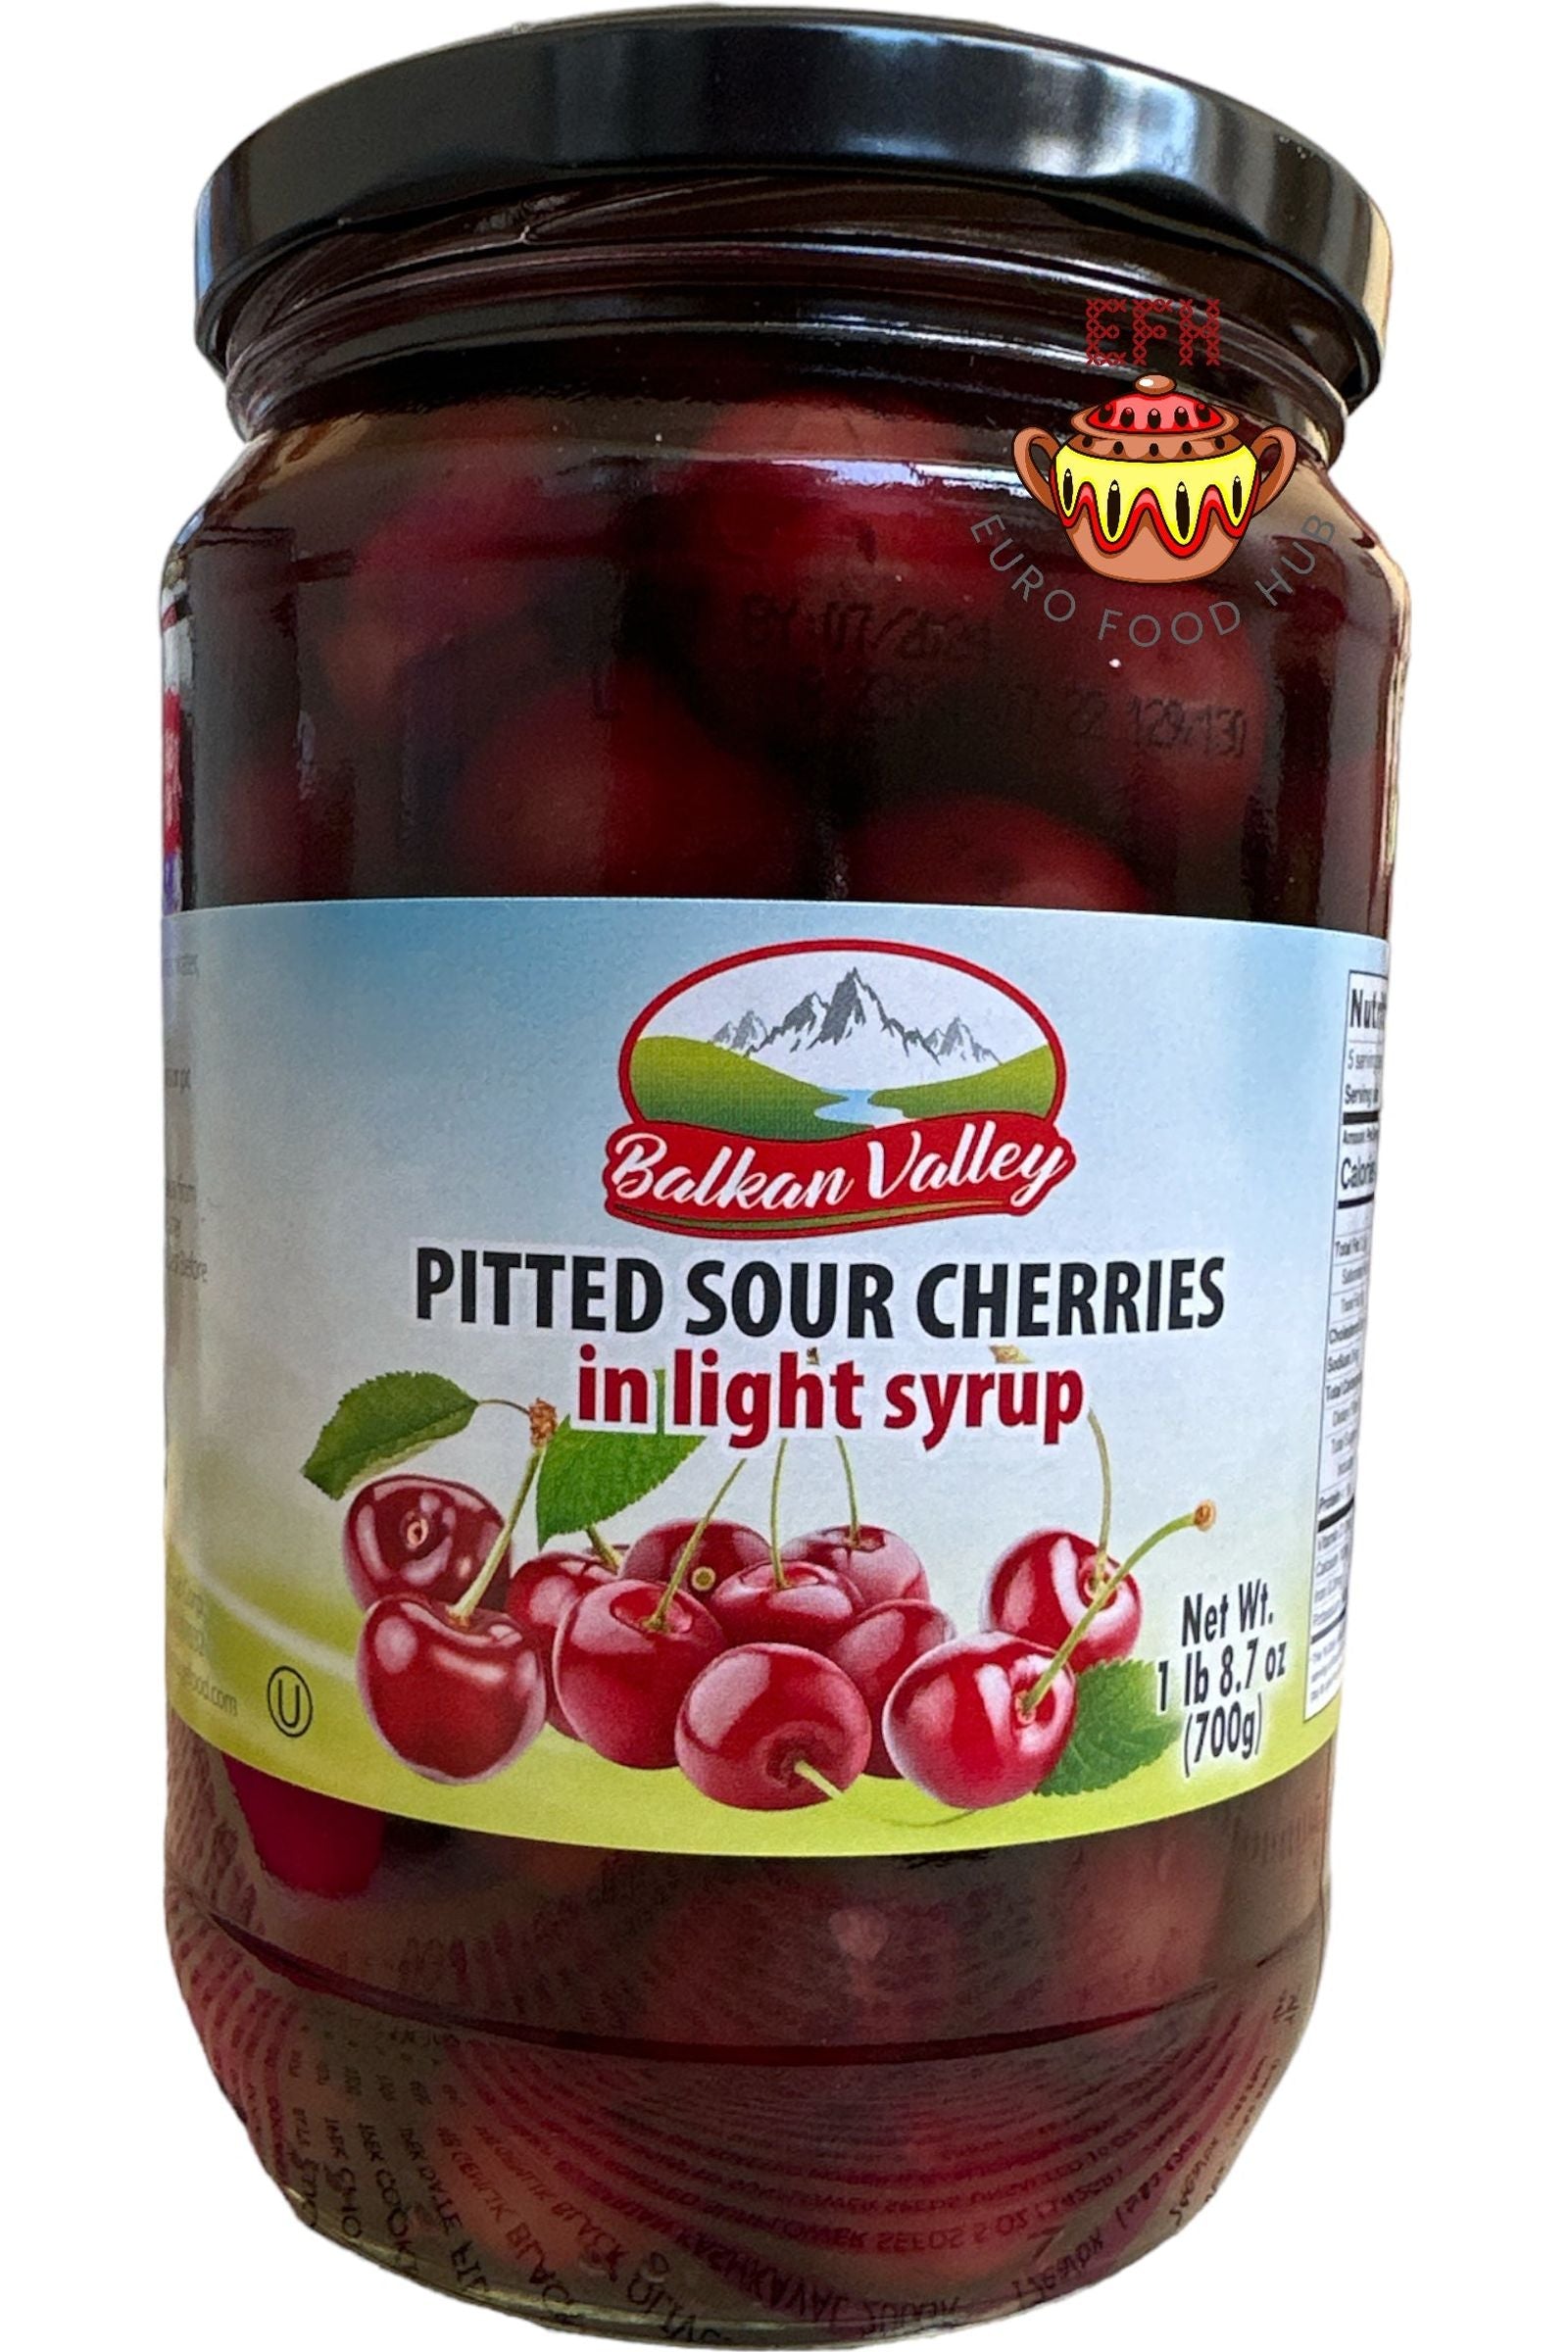 Pitted Sour Cherries in Light Syrup - Balkan Valley - 700g